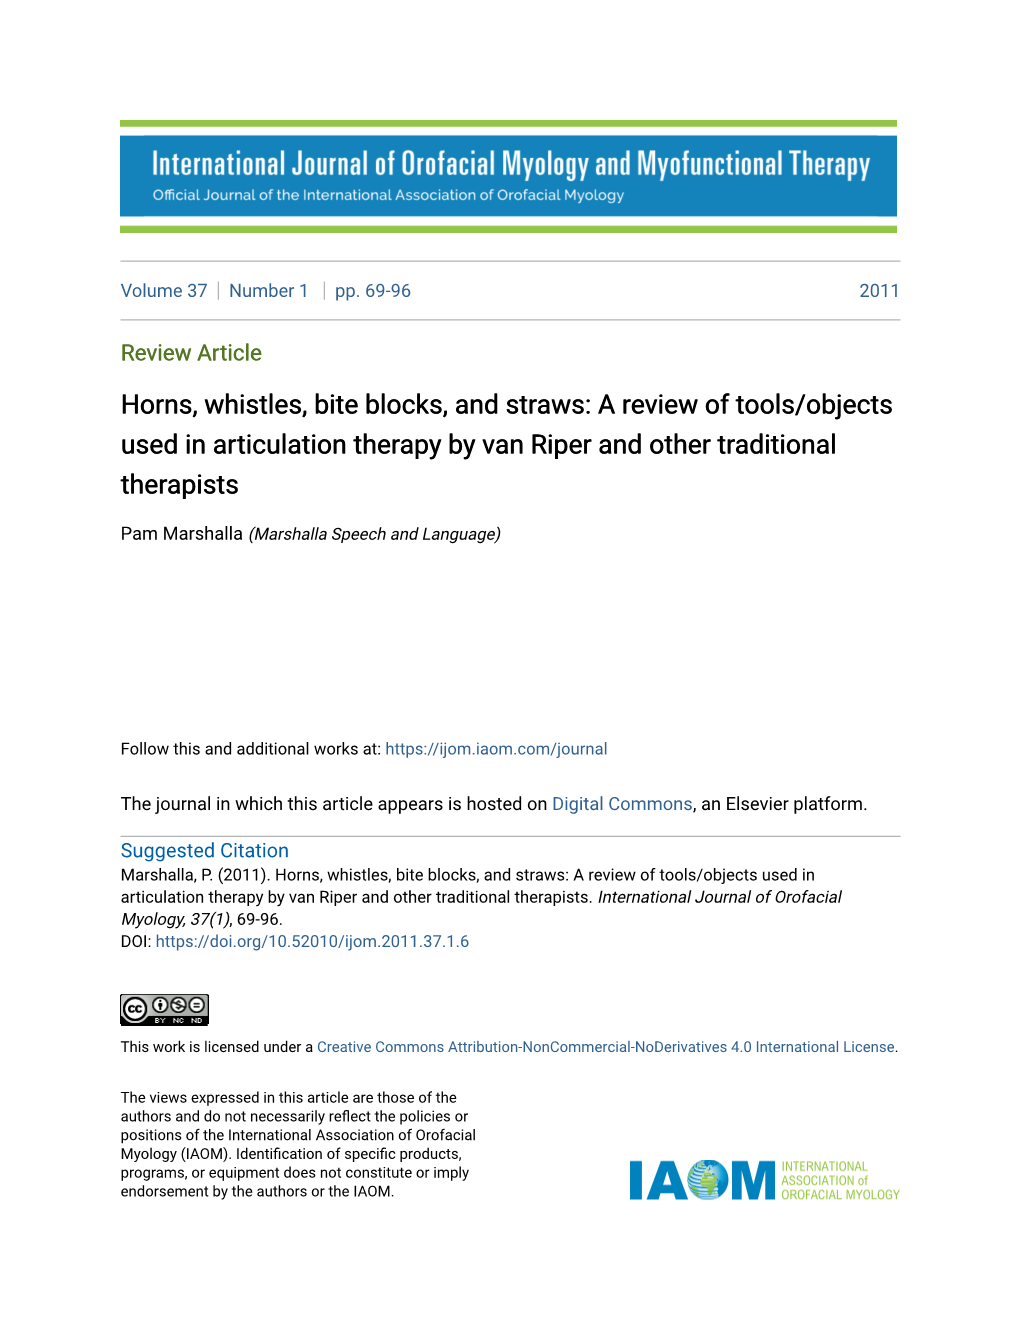 A Review of Tools/Objects Used in Articulation Therapy by Van Riper and Other Traditional Therapists